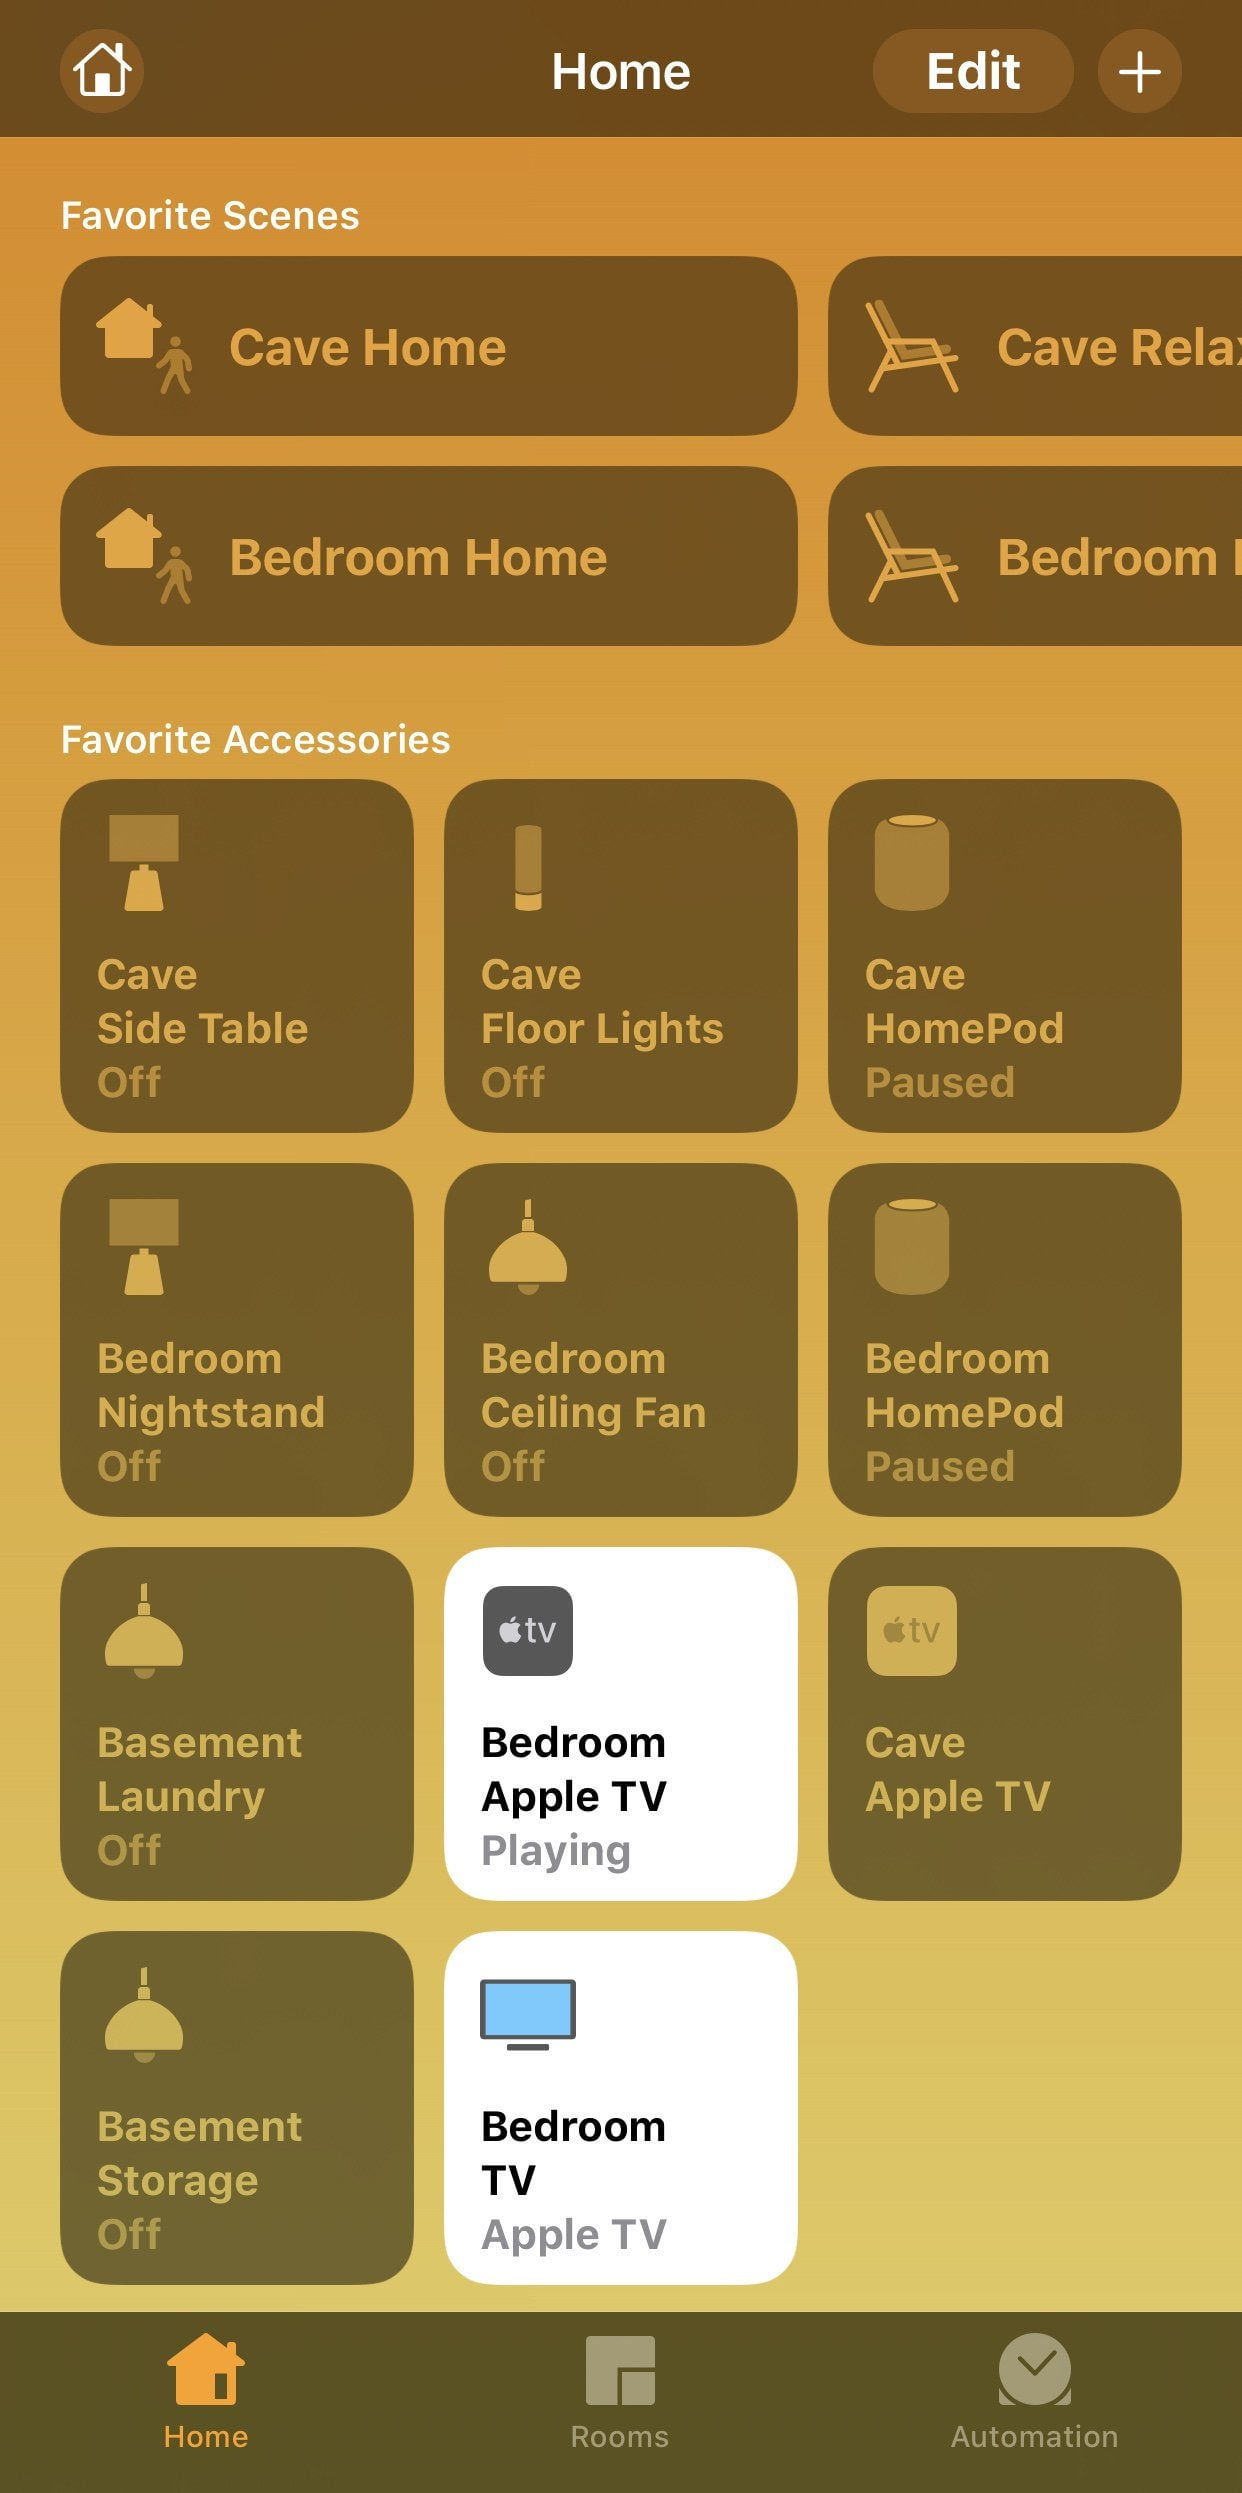 After starting with just 2 Hue Lights in 2014 the